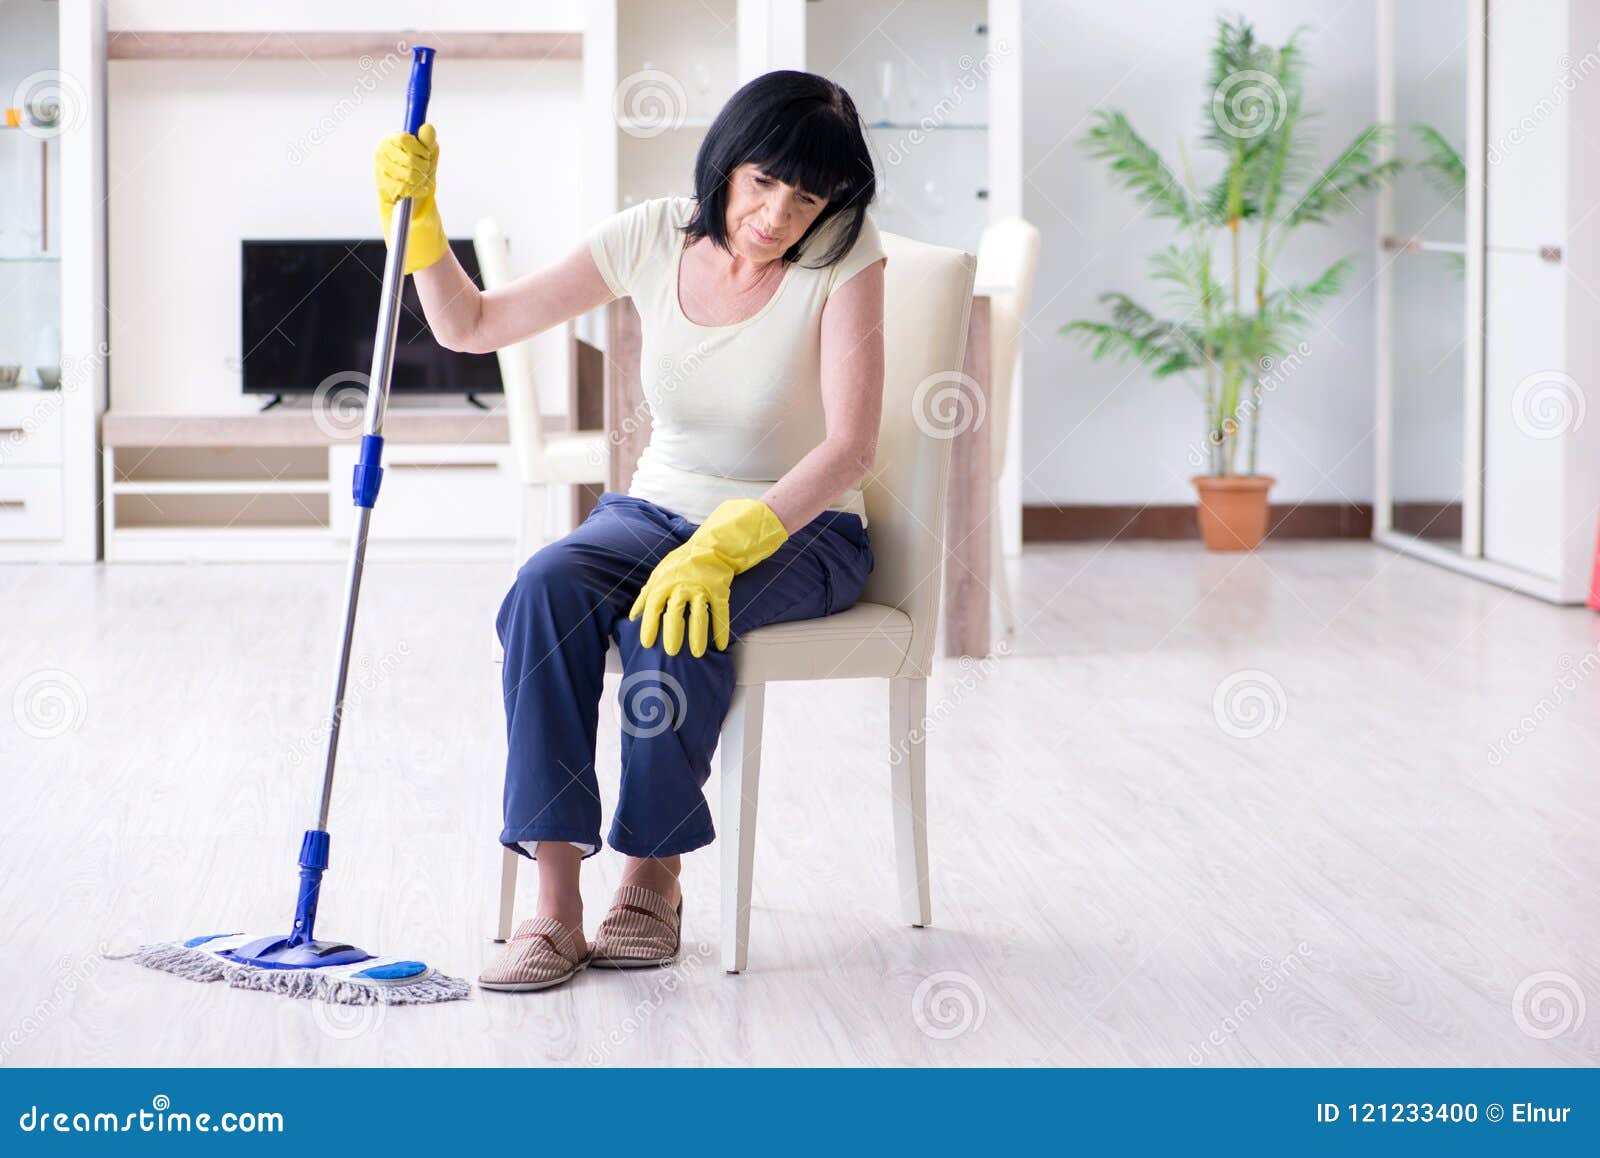 The Old Mature Woman Tired After House Chores Stock Photo Image